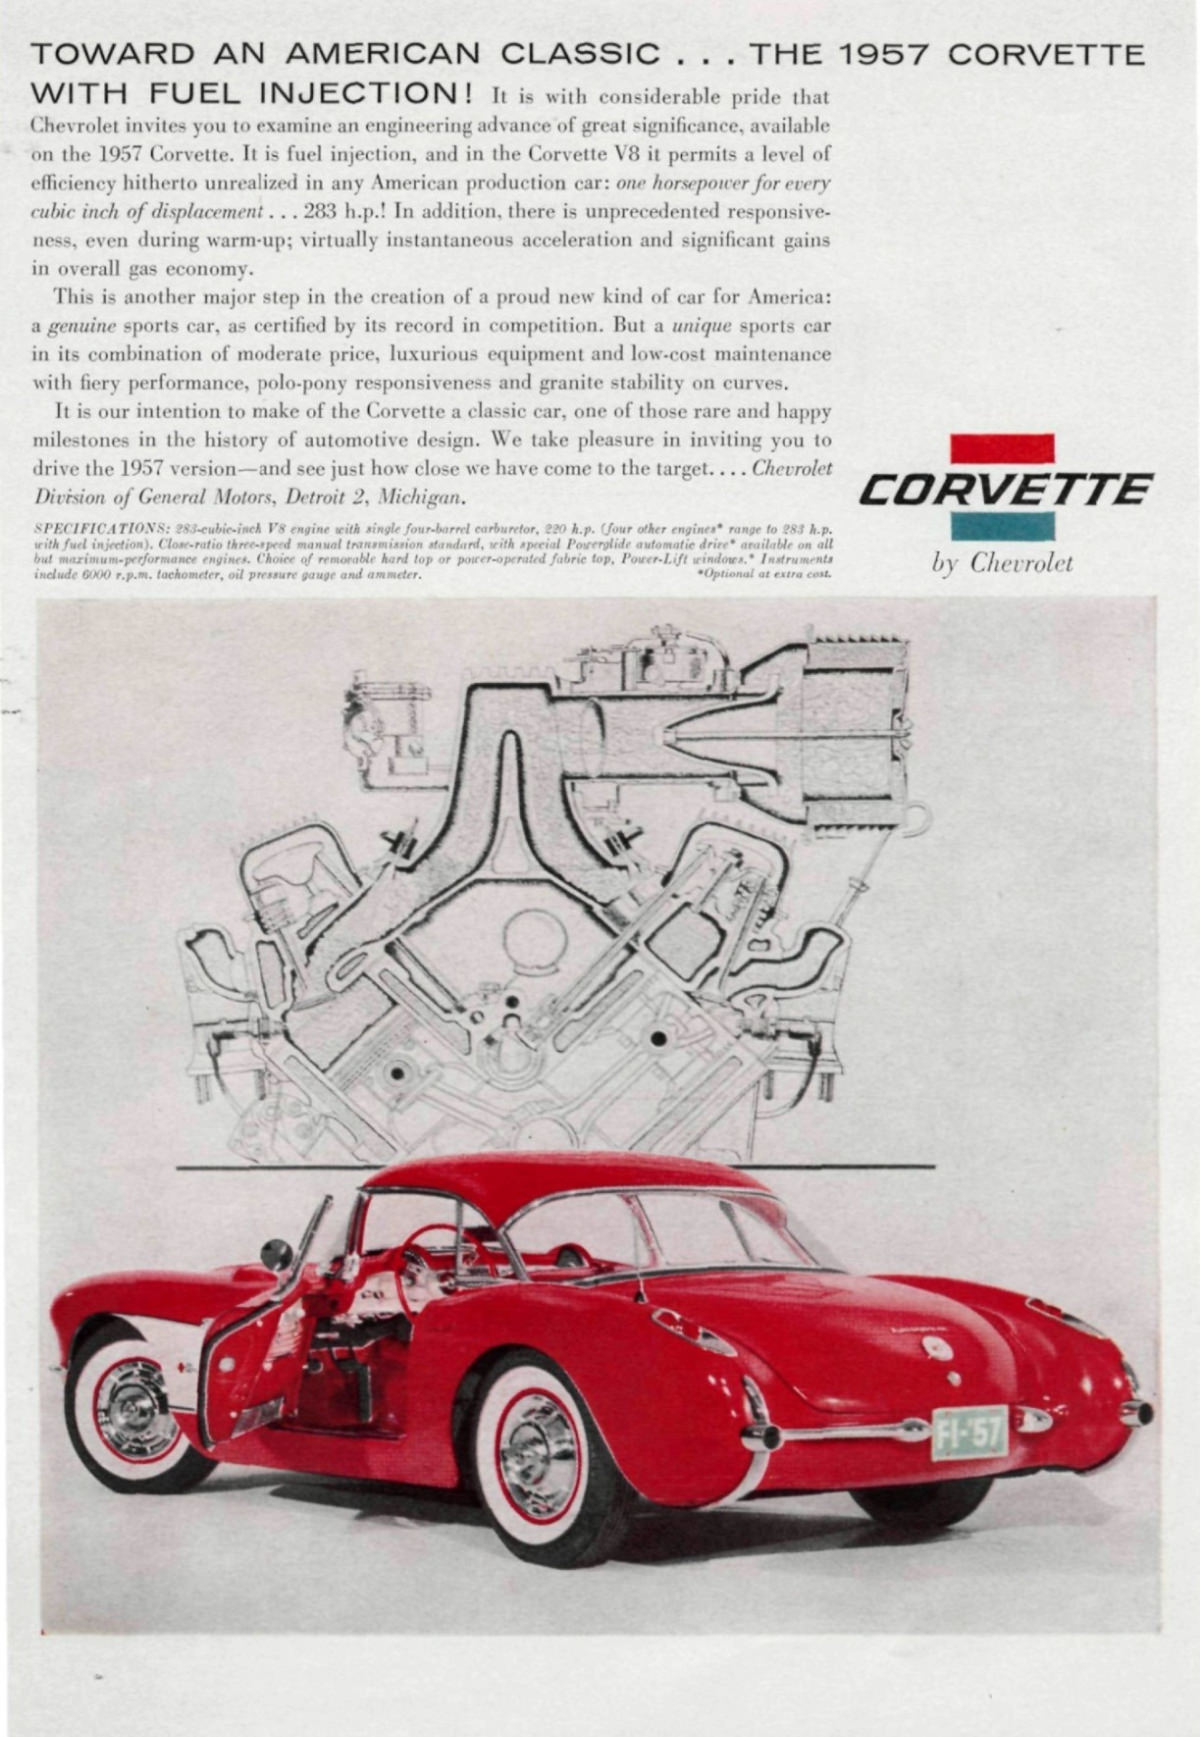 Vintage Ads for the Chevrolet Corvette (C1) From the 1950s